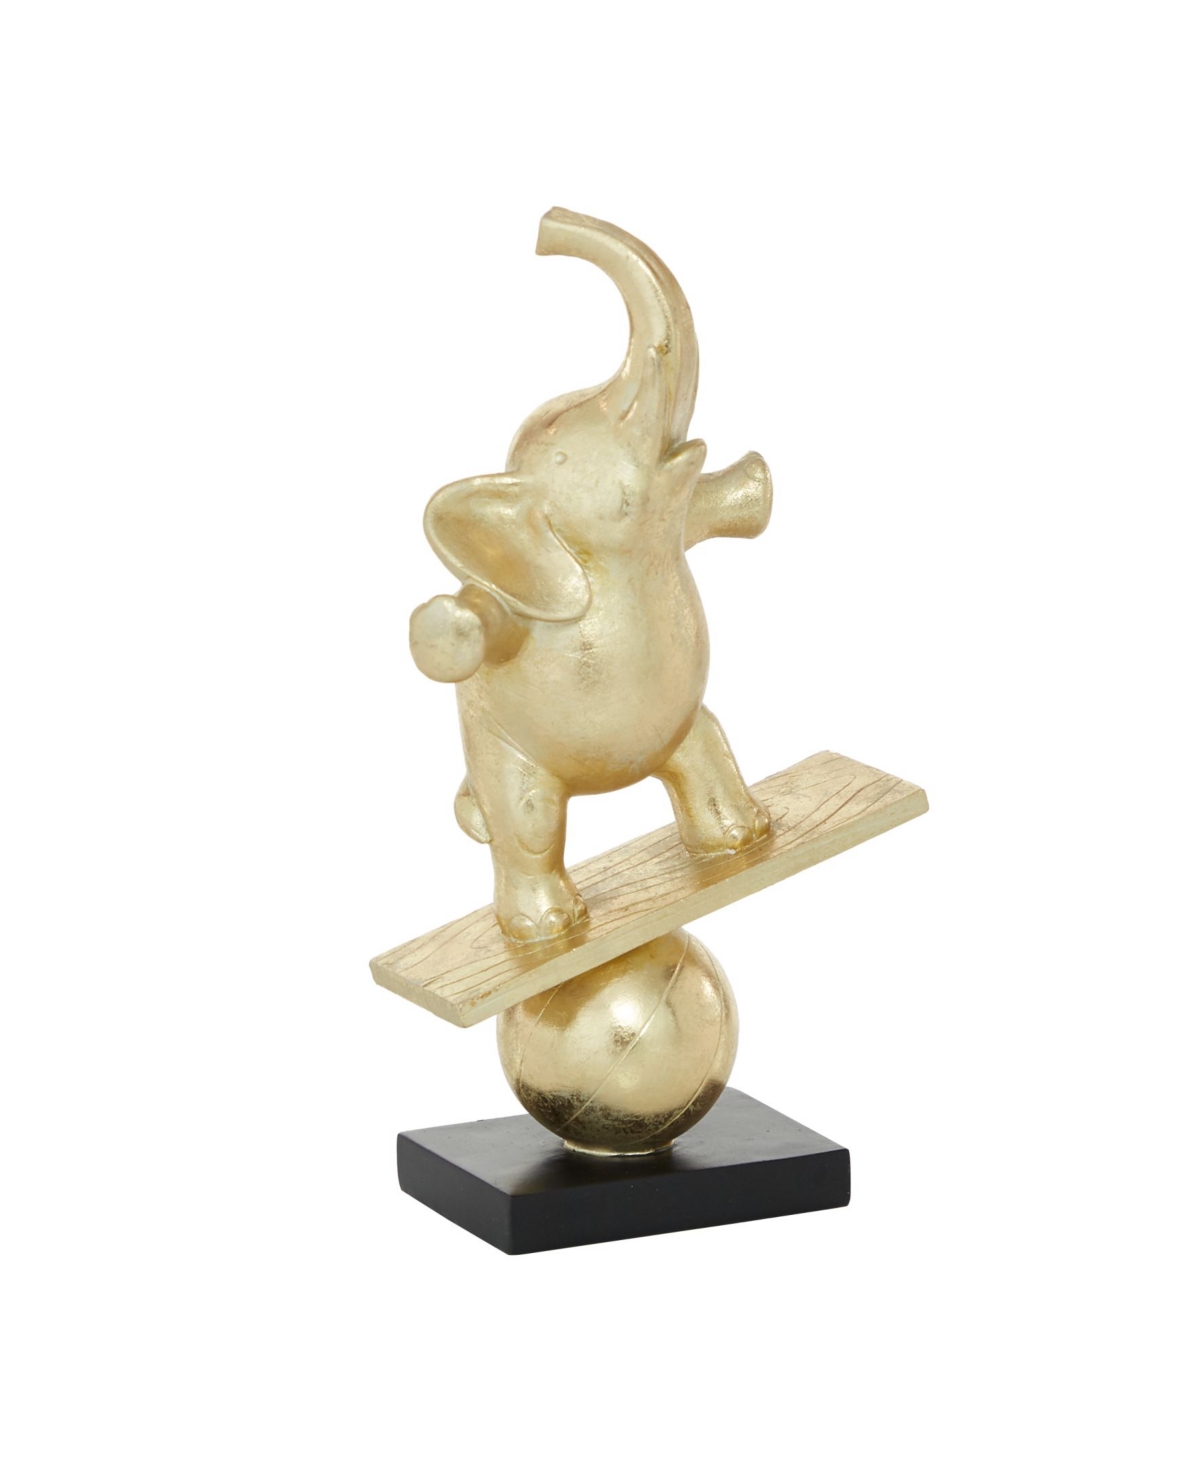 Rosemary Lane Contemporary Elephant Sculpture, 12" X 7" In Gold-tone